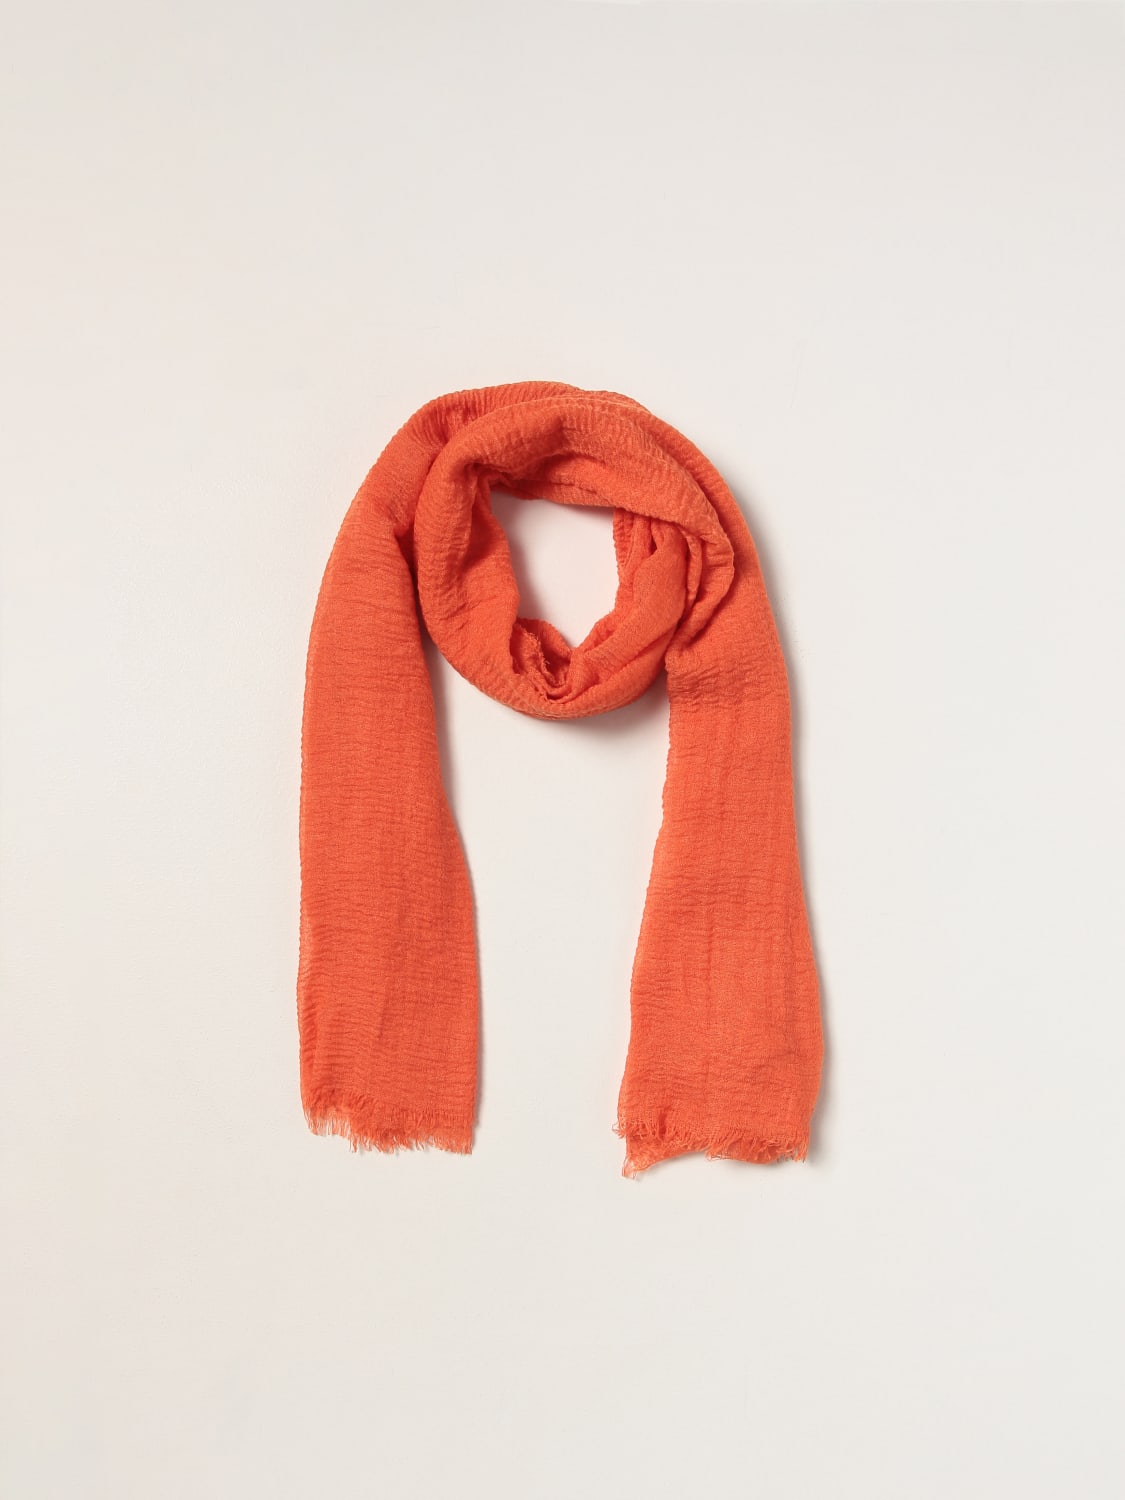 Kaos Outlet: scarf for woman - Orange | Kaos scarf PPAZM001 online at